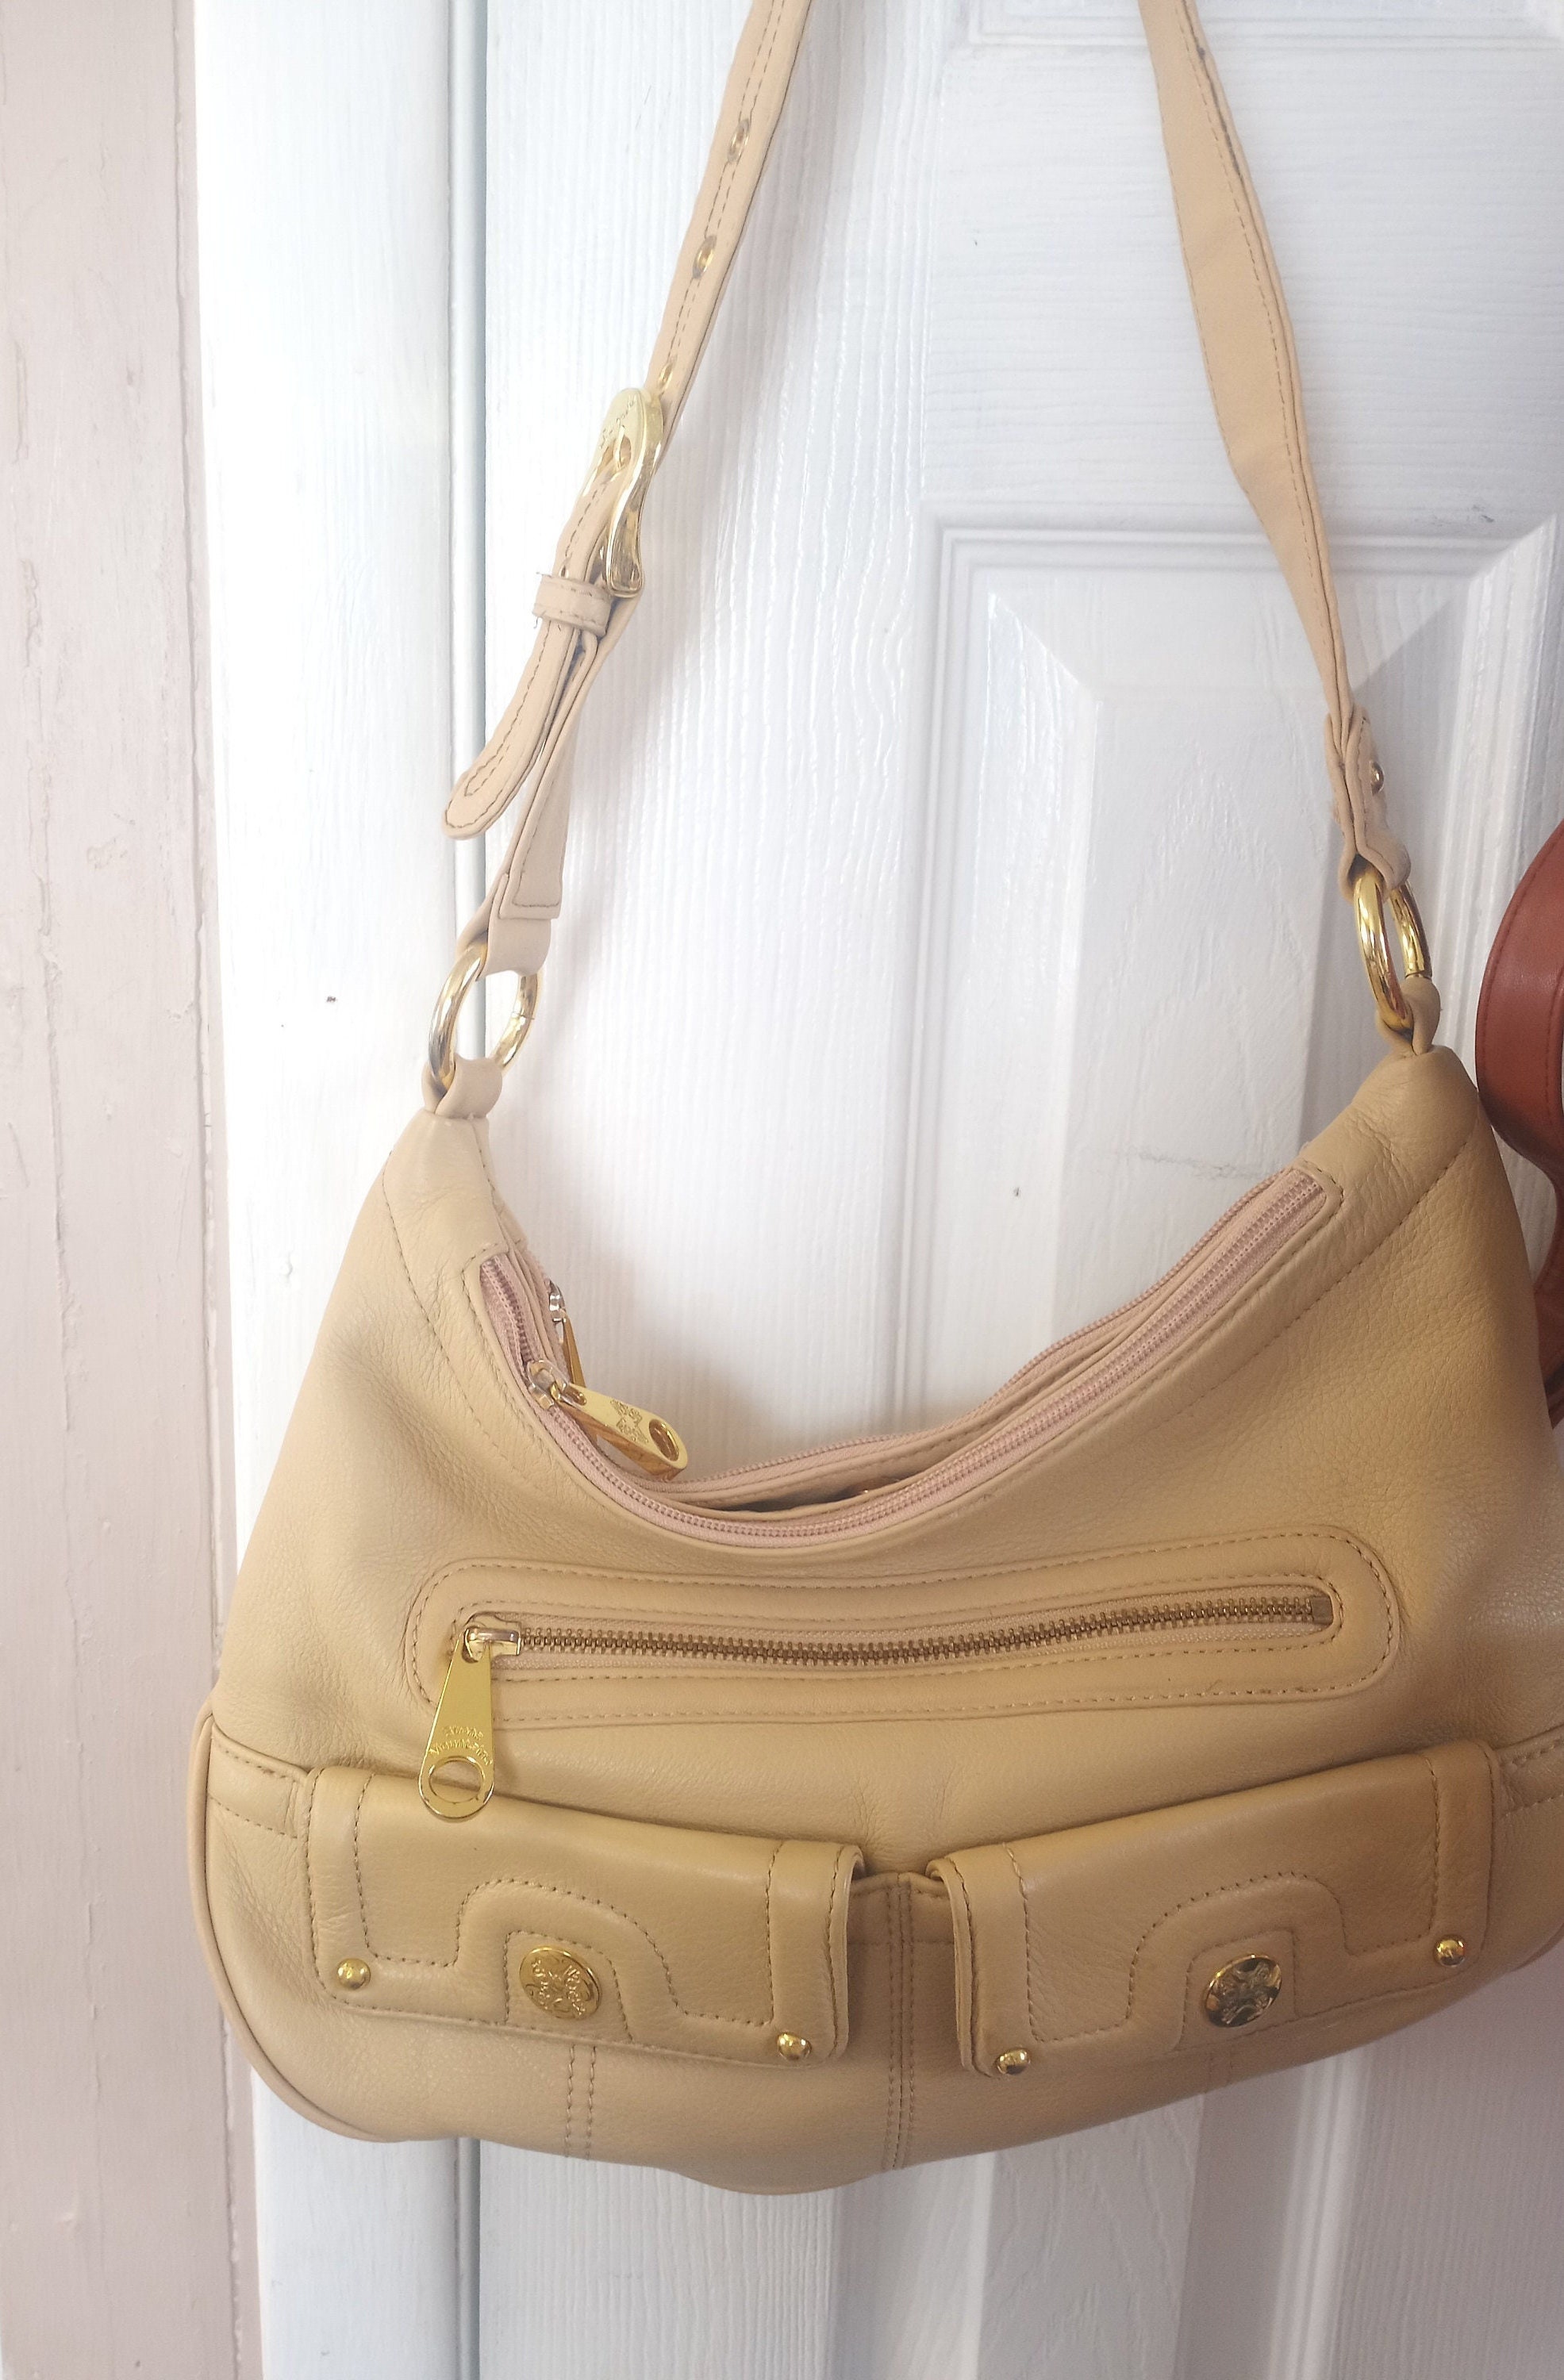 Shoulder Bag, Stone Mountain, Tote Bag, Faux Leather, Tan and